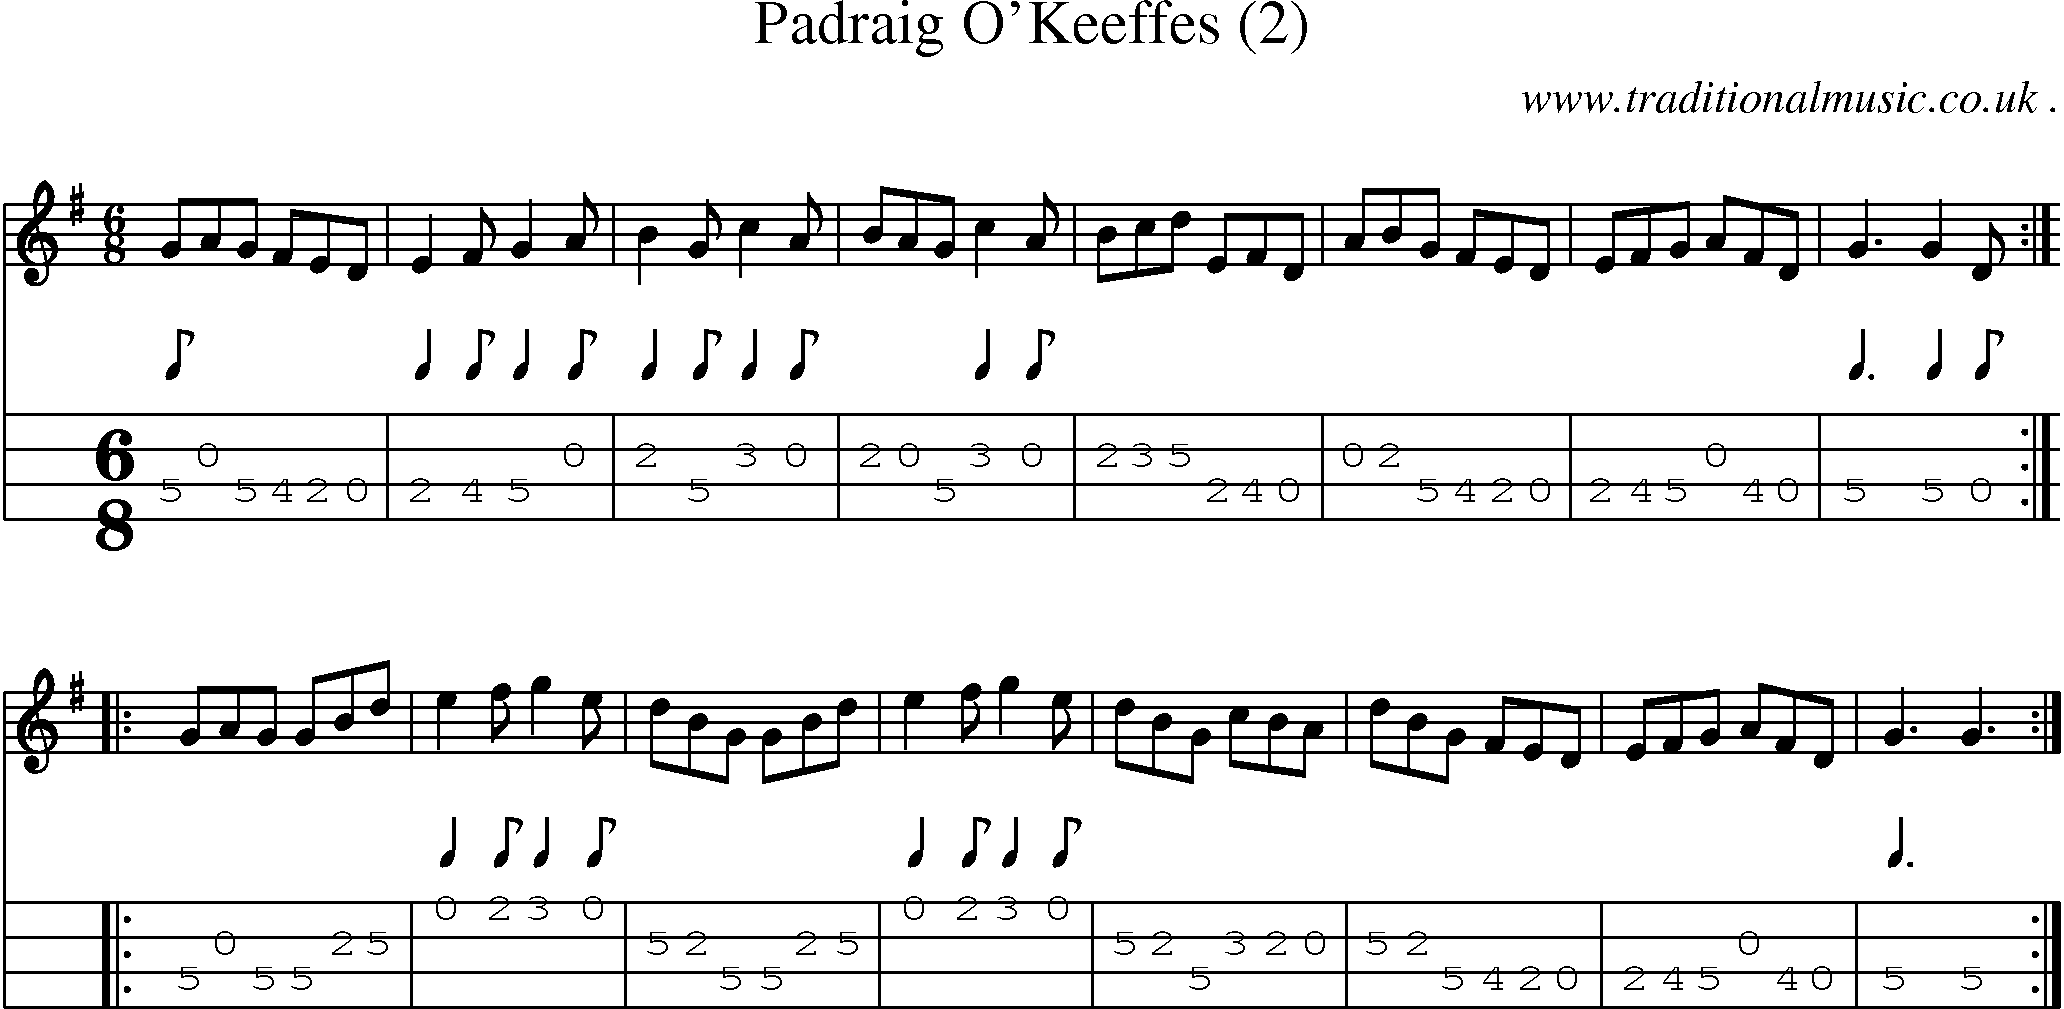 Sheet-Music and Mandolin Tabs for Padraig Okeeffes (2)